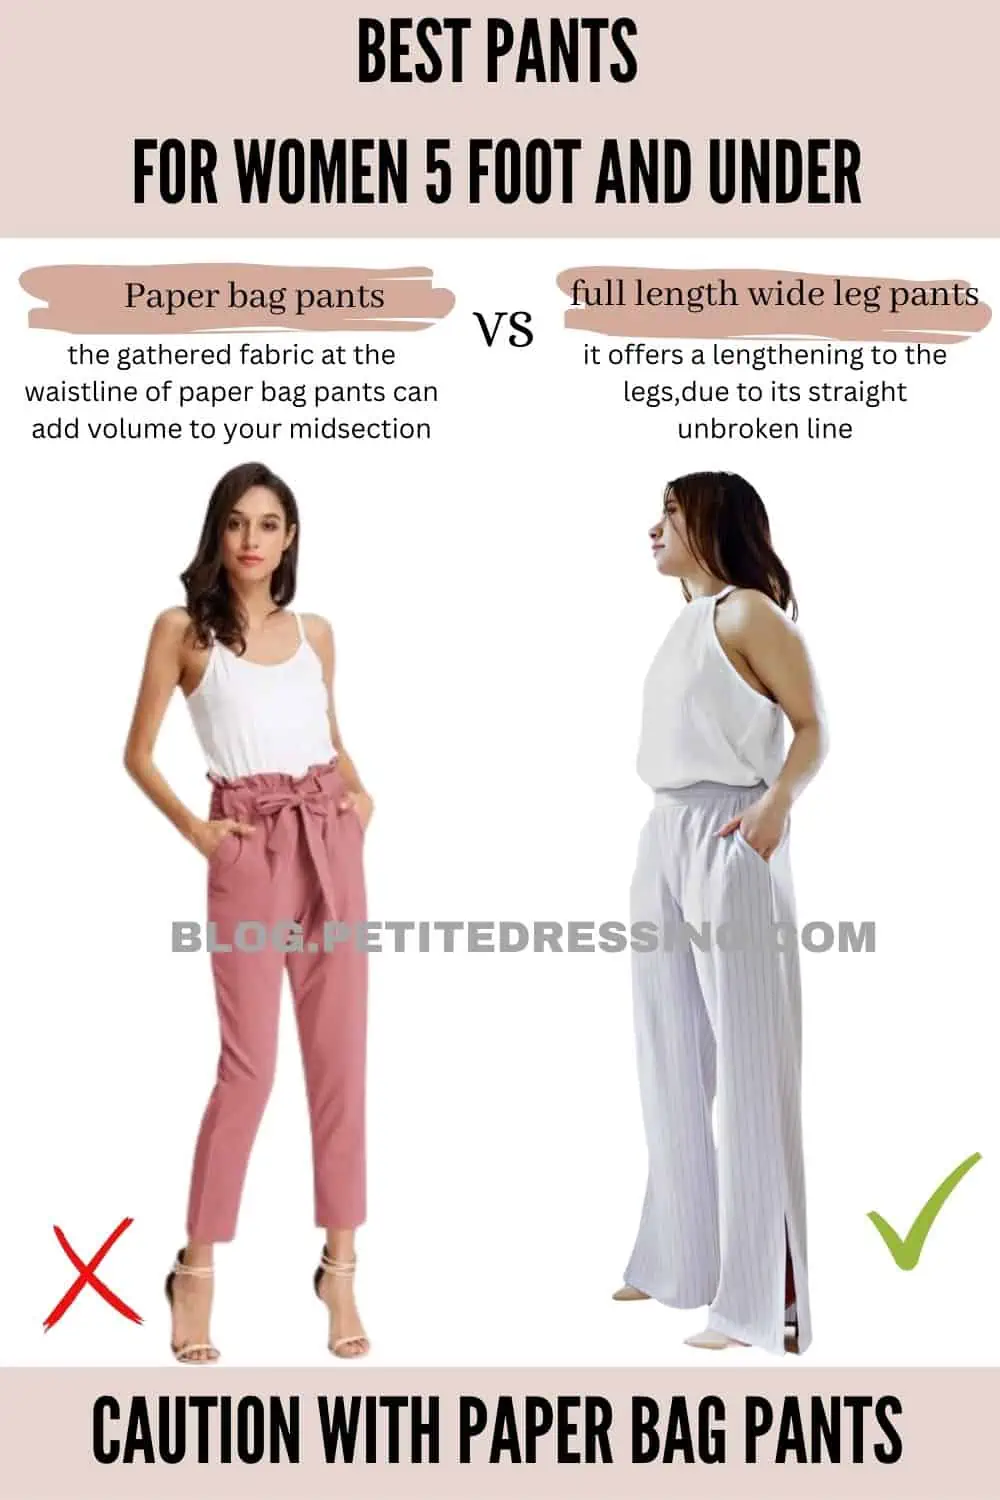 HOW I FIND PANTS THAT ARE LONG ENOUGH ONLINE - Five Foot Nine